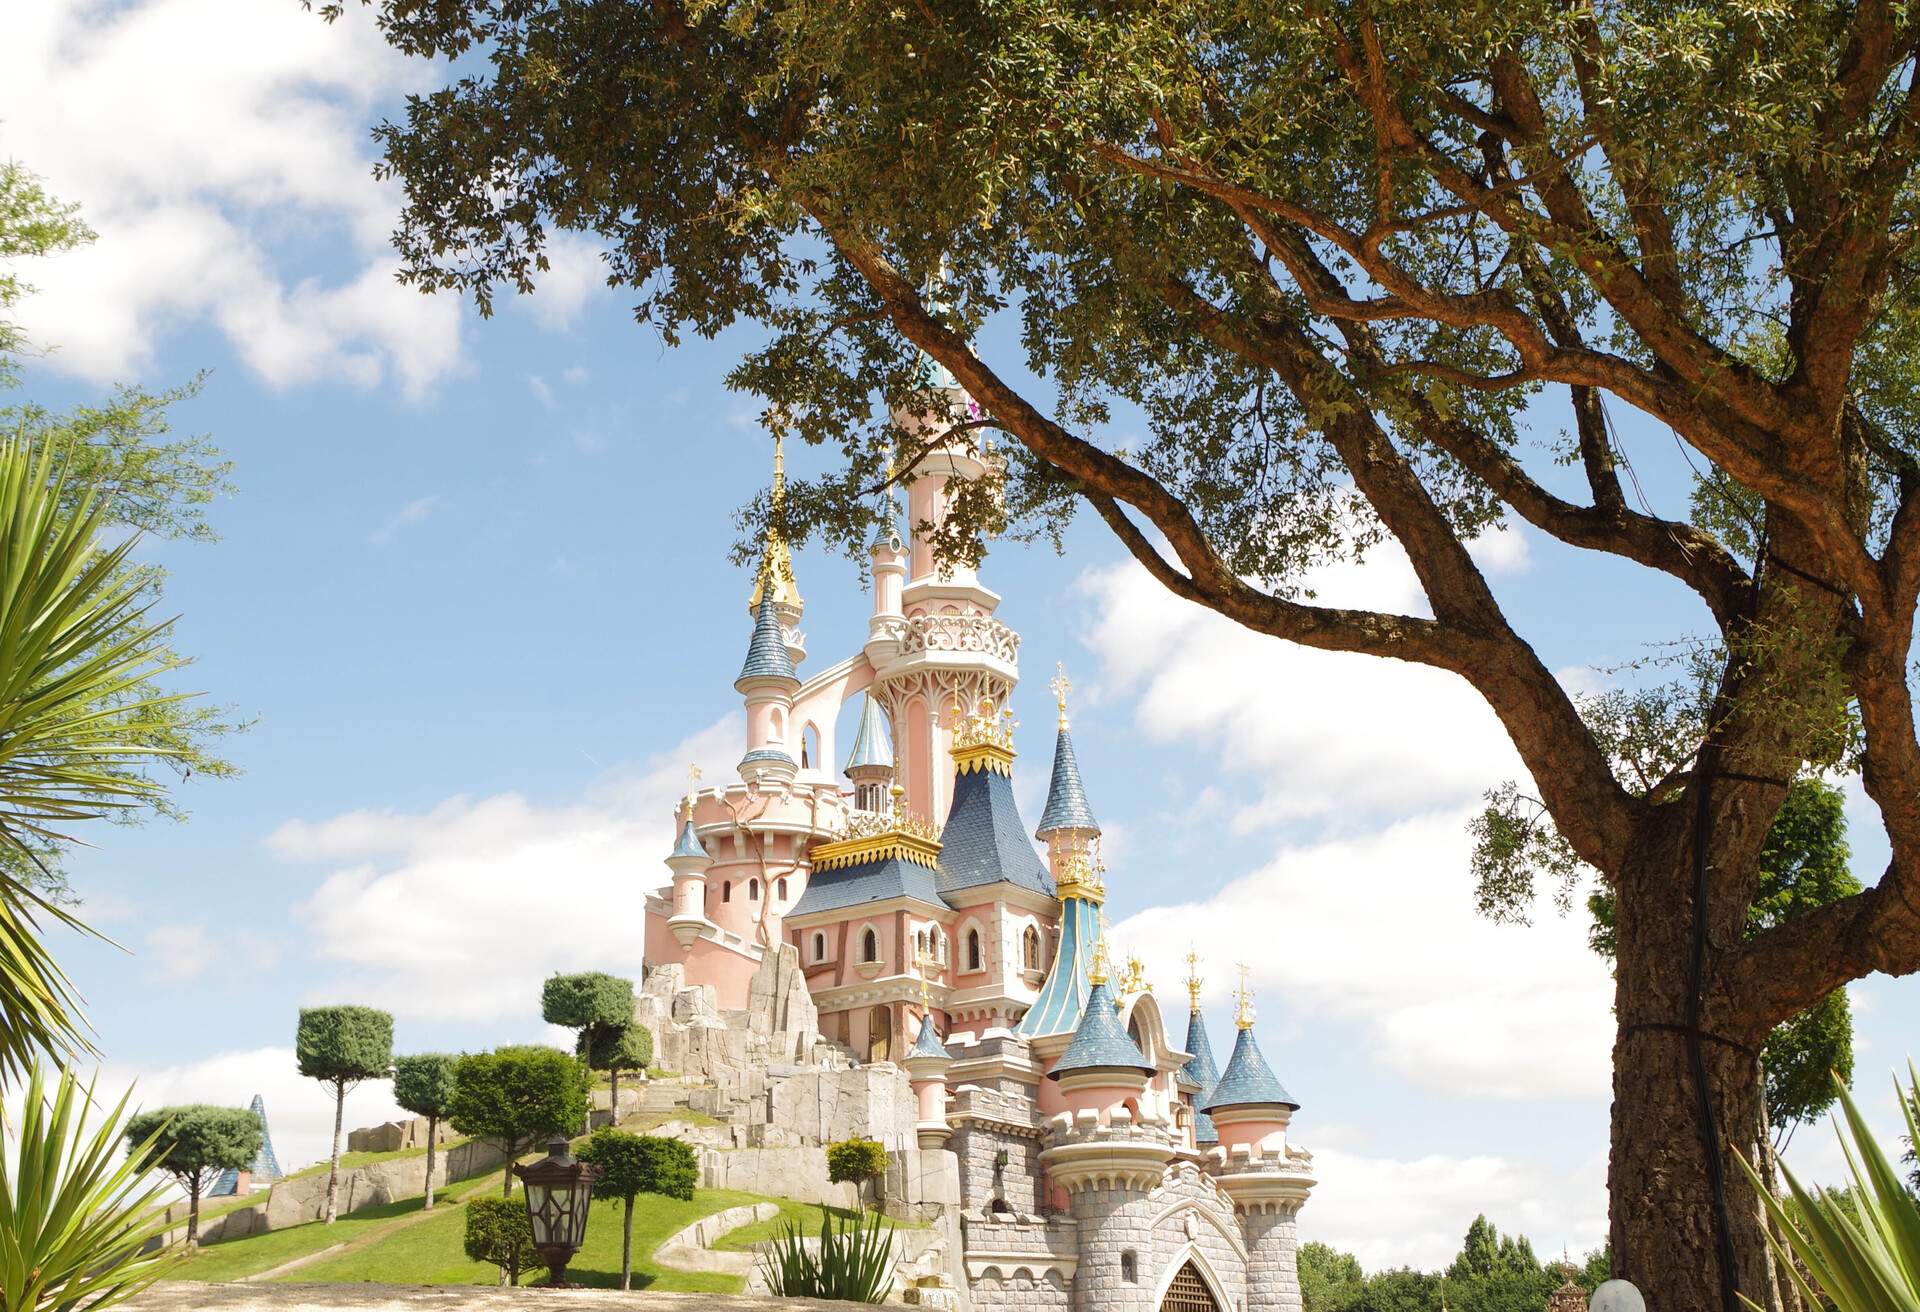 The Disney fairytale castle complete with its tiled roofs and elegant cornice.